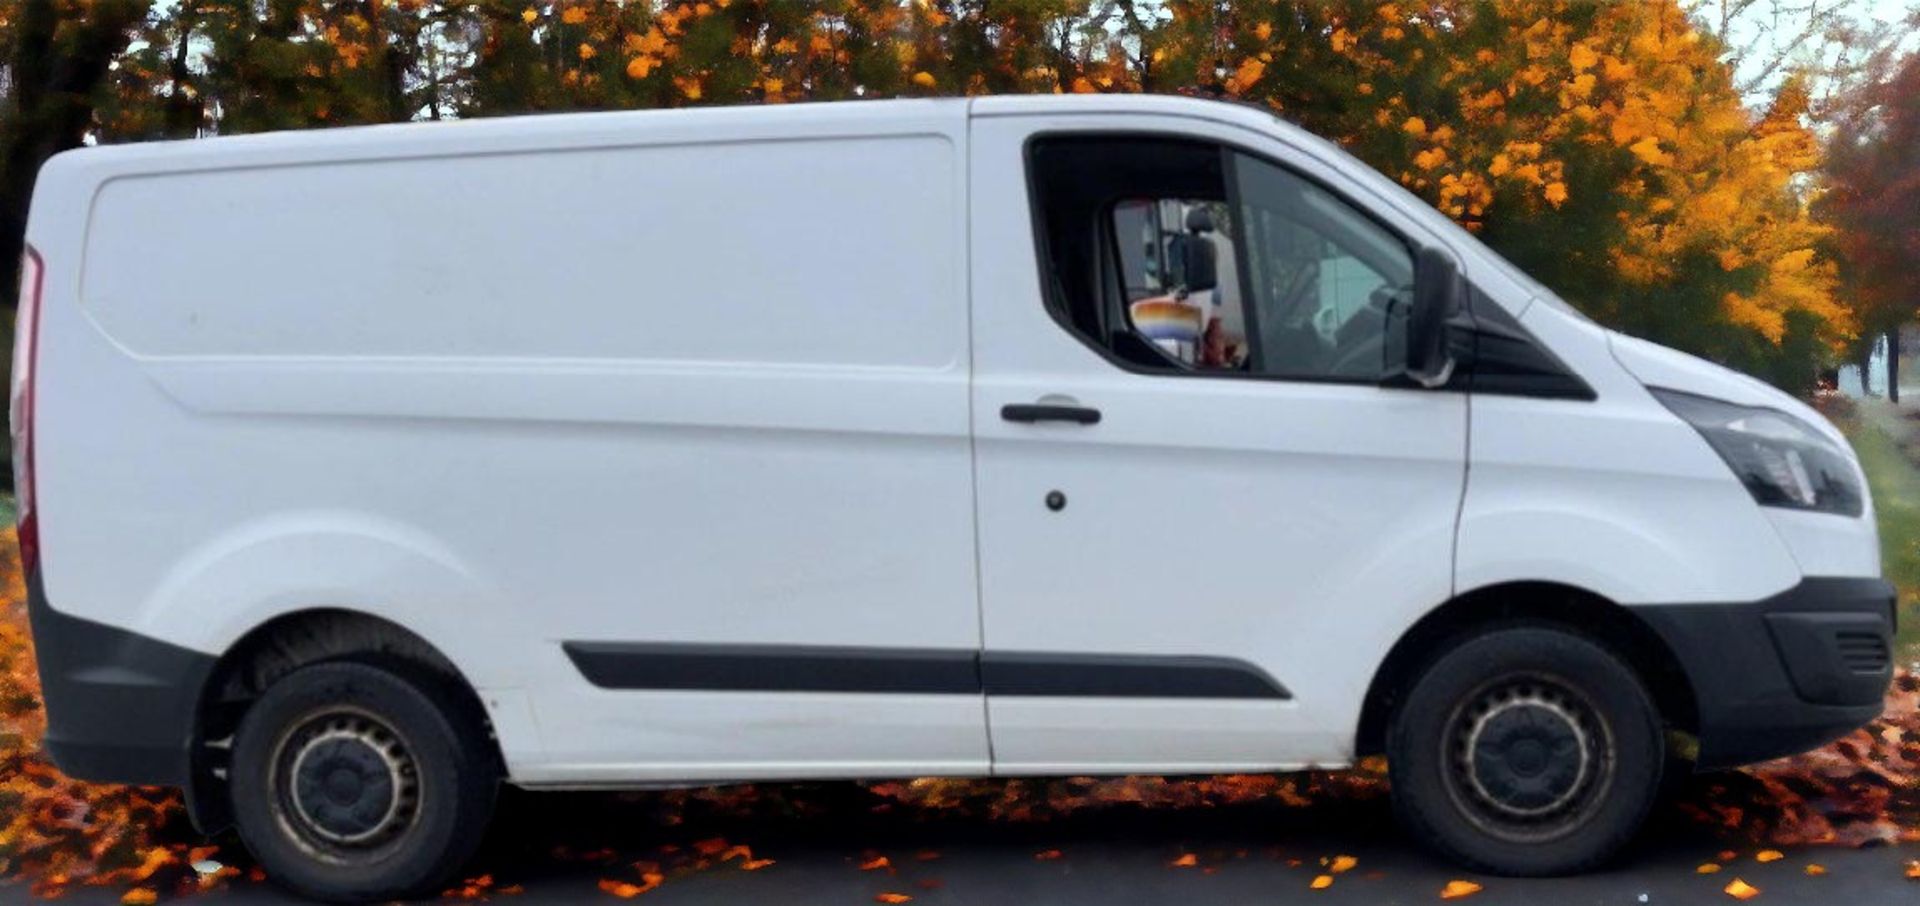 2015 FORD TRANSIT CUSTOM PANEL VAN - RELIABLE AND EFFICIENT WORKHORSE - Image 5 of 17